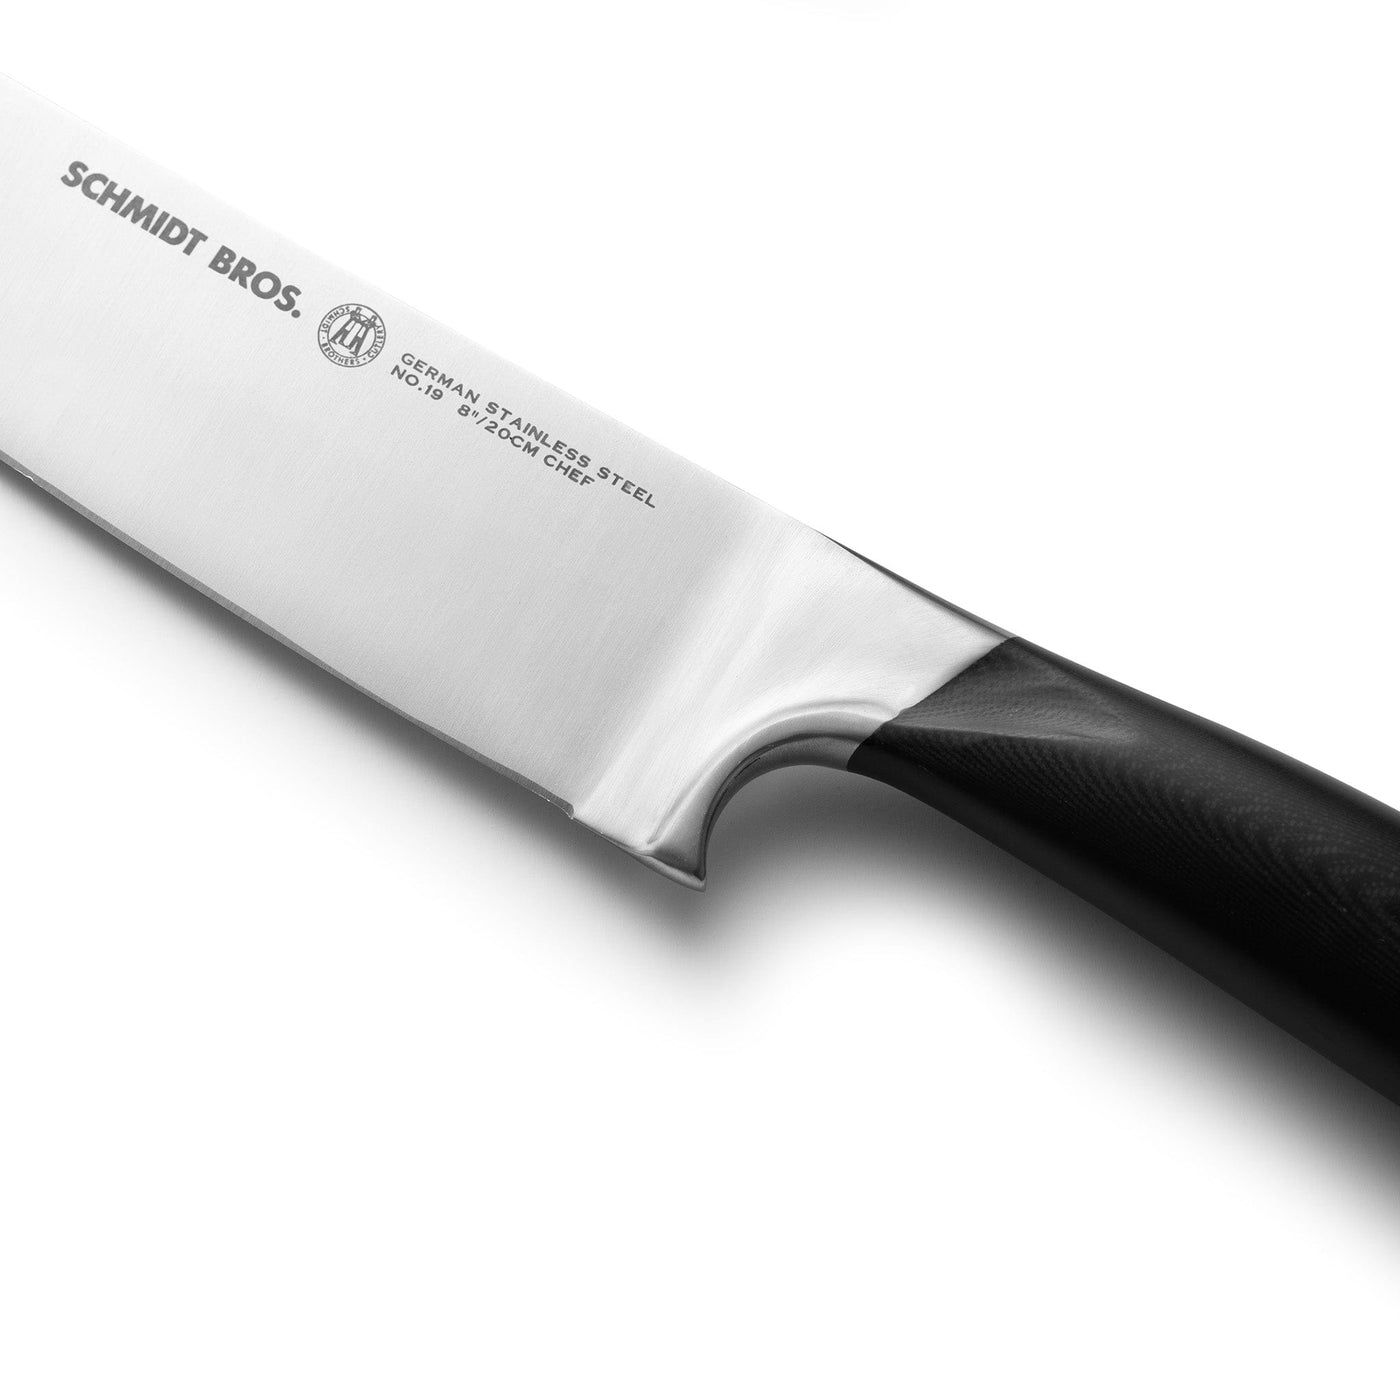 https://schmidtbrothers.com/cdn/shop/files/schmidt-brothers-kitchen-cutlery-schmidt-brothers-heritage-series-12-piece-knife-set-high-carbon-stainless-steel-cutlery-and-acrylic-magnetic-knife-block-30743378427965_1400x.jpg?v=1684157499